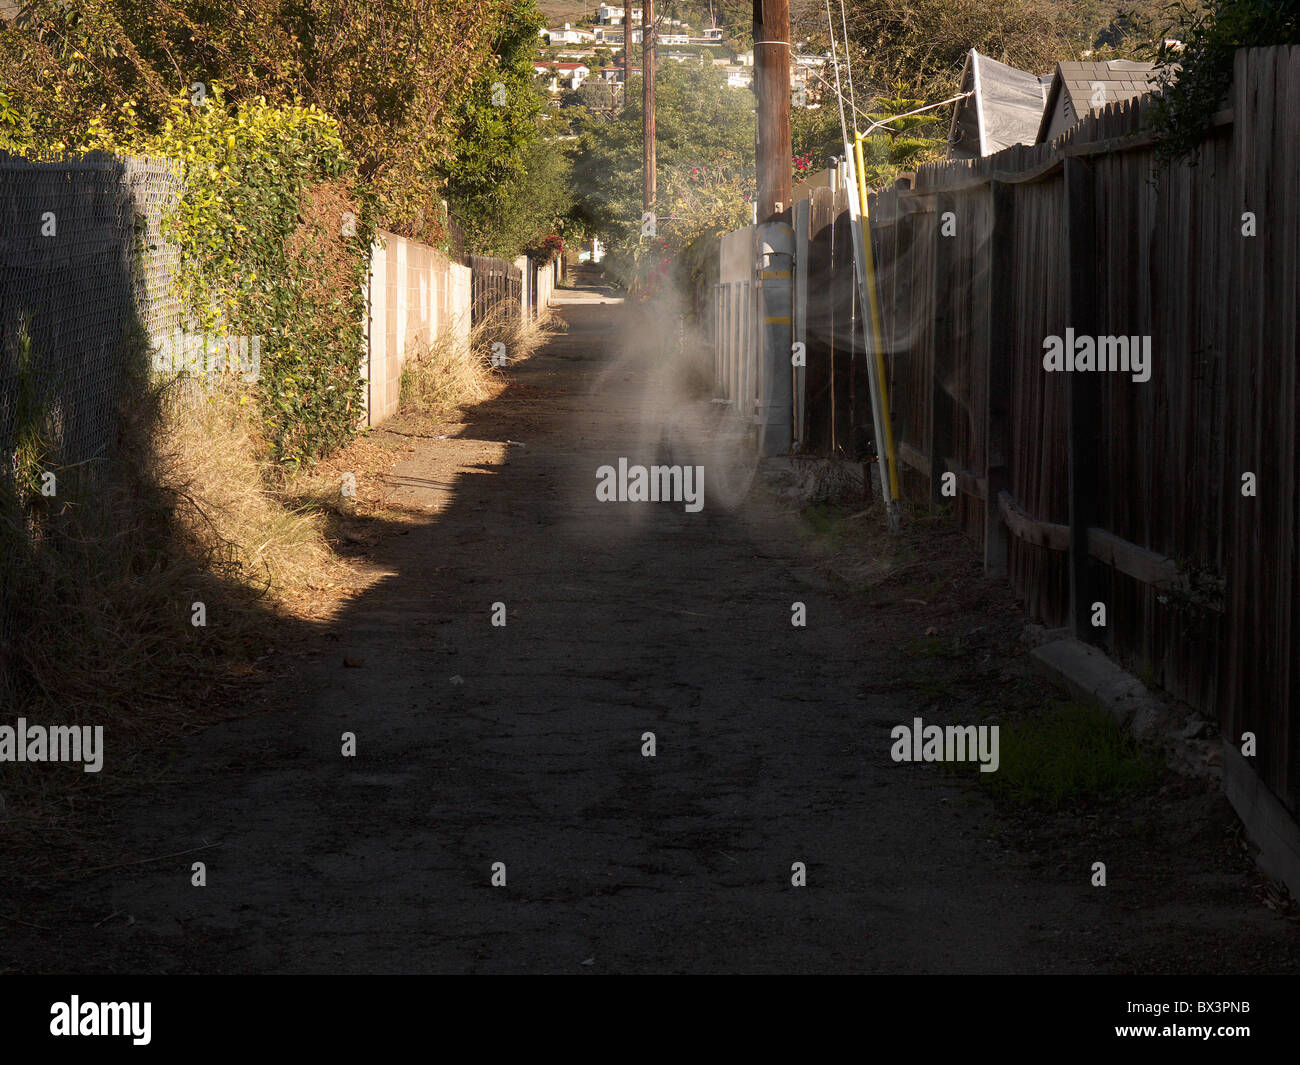 Ghost sighting in an alley Stock Photo